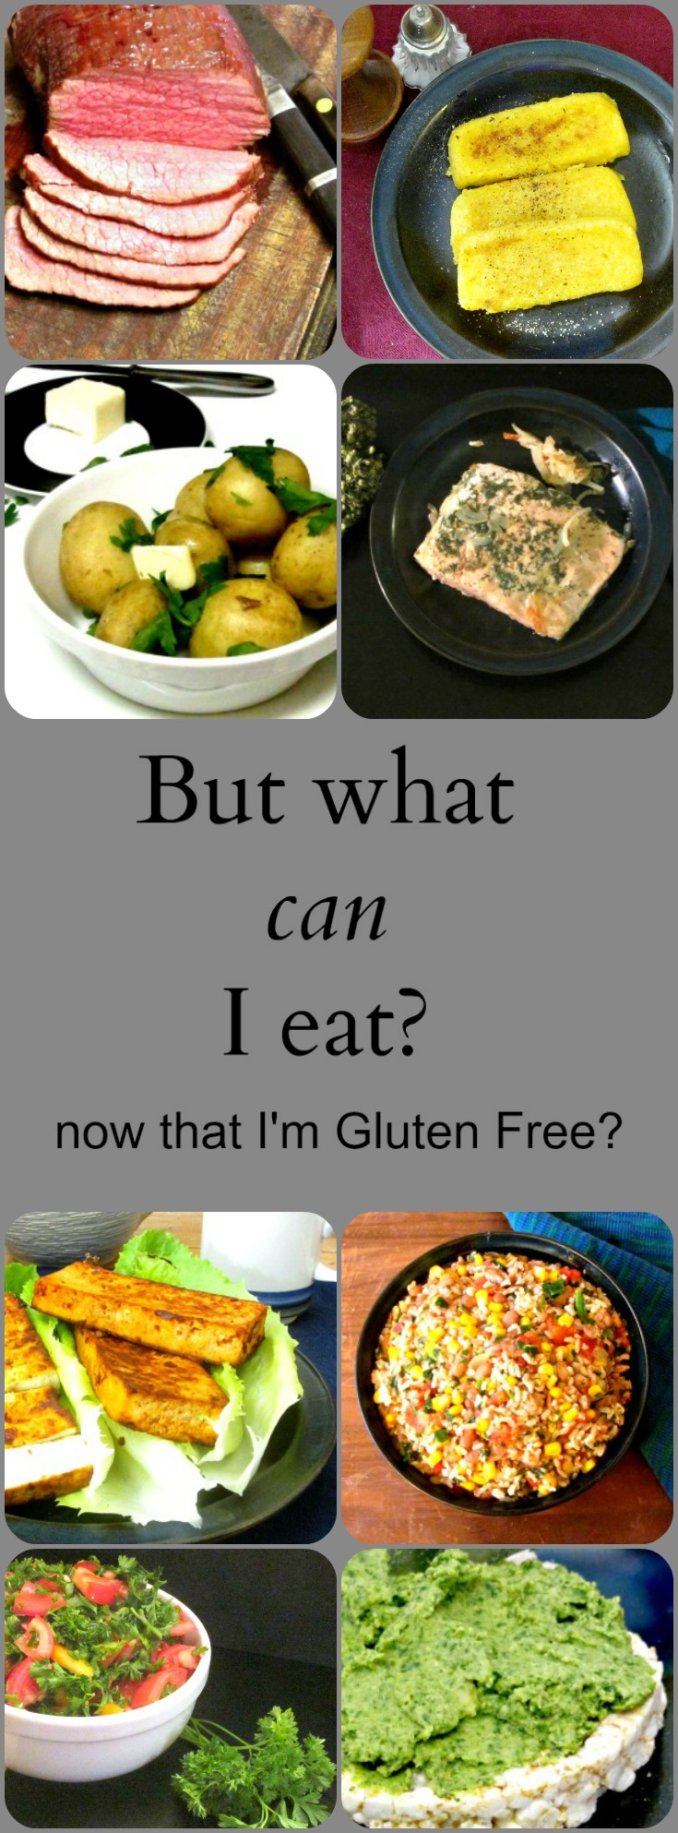 Have you looked at a long list of food containing gluten, and wondered what is left? Here's the good news - most food is naturally gluten free! 